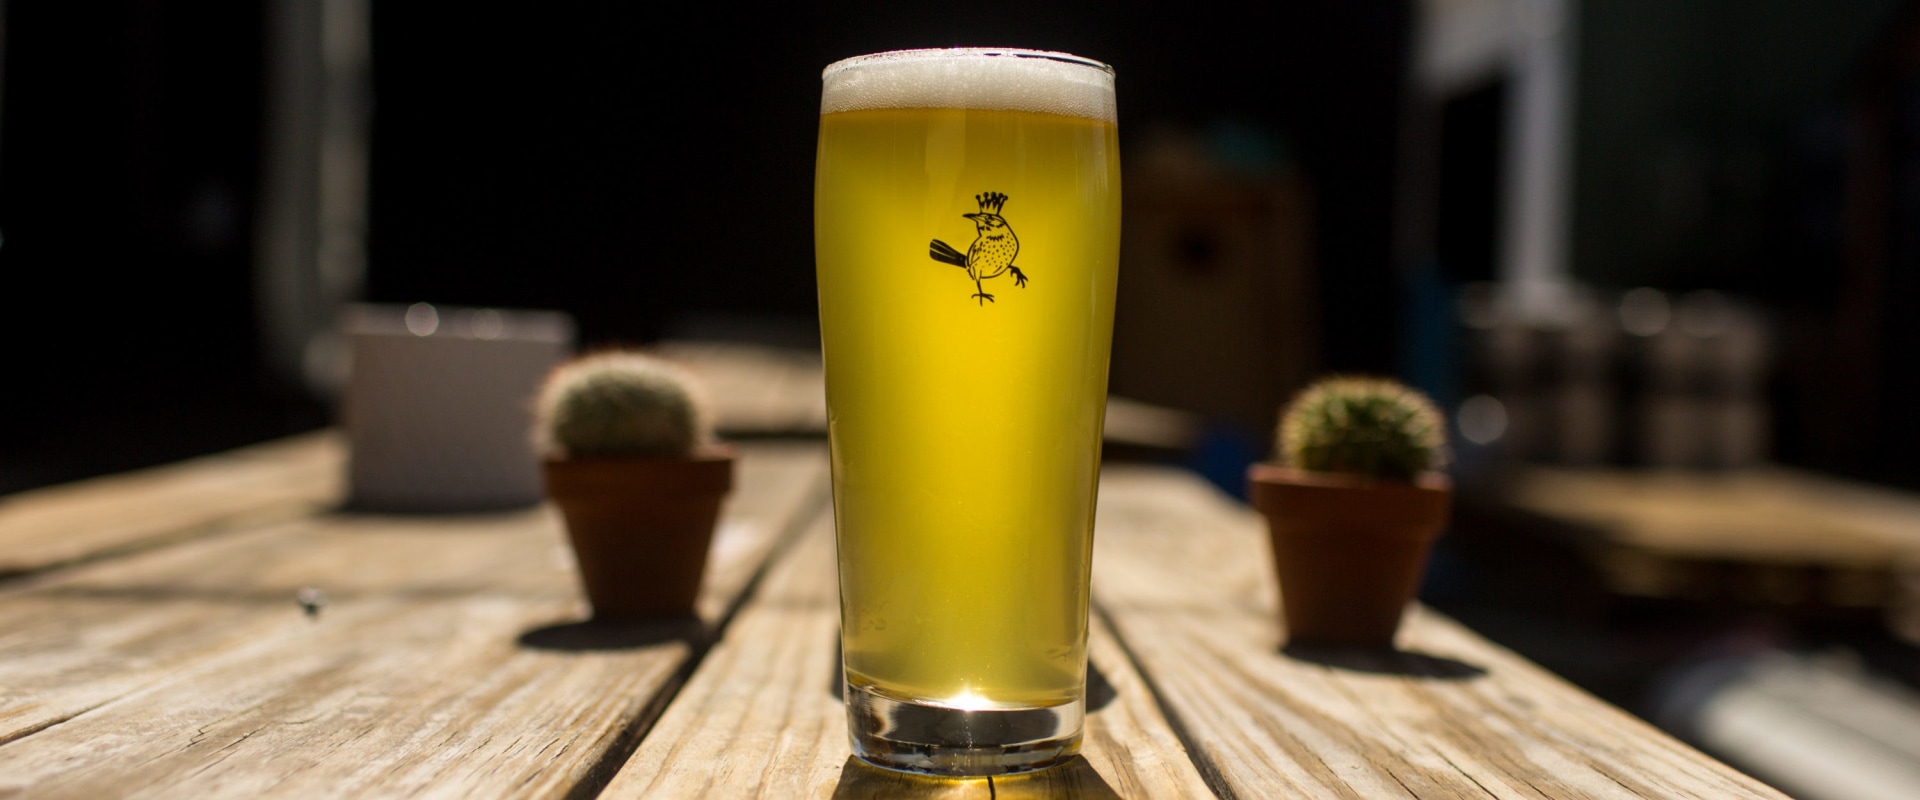 The Best Craft Beer Bar in Scottsdale, AZ - Scapegoat Beer and Wine Bar